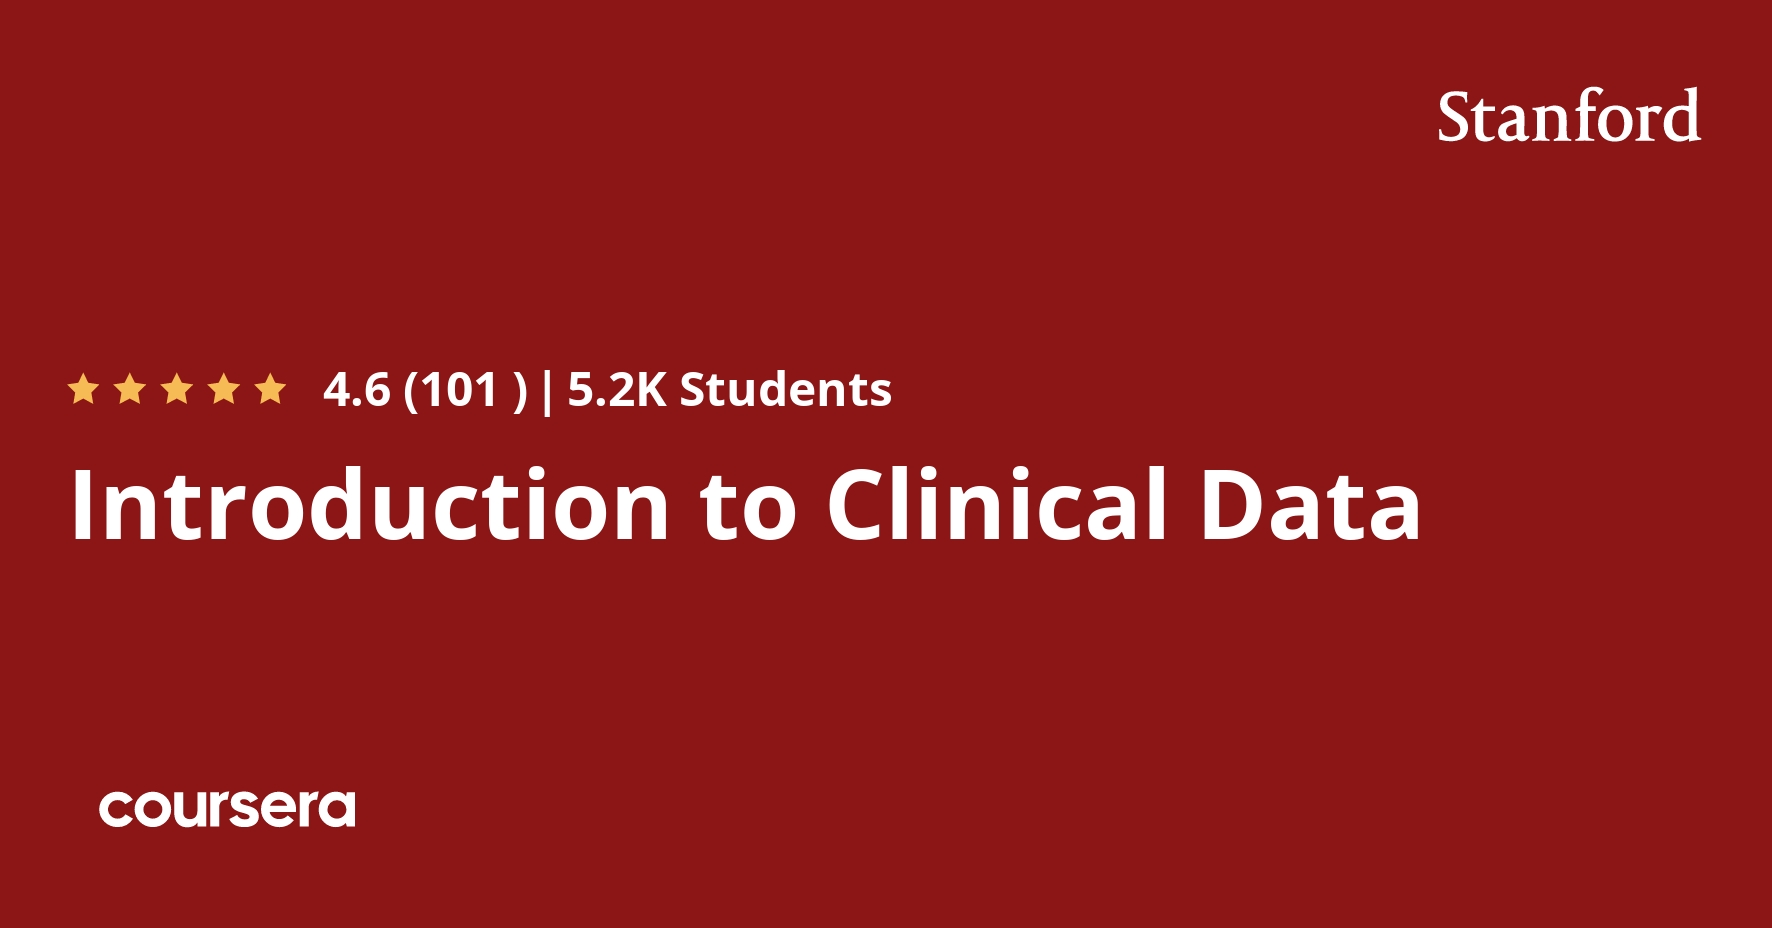 Introduction to Clinical Data